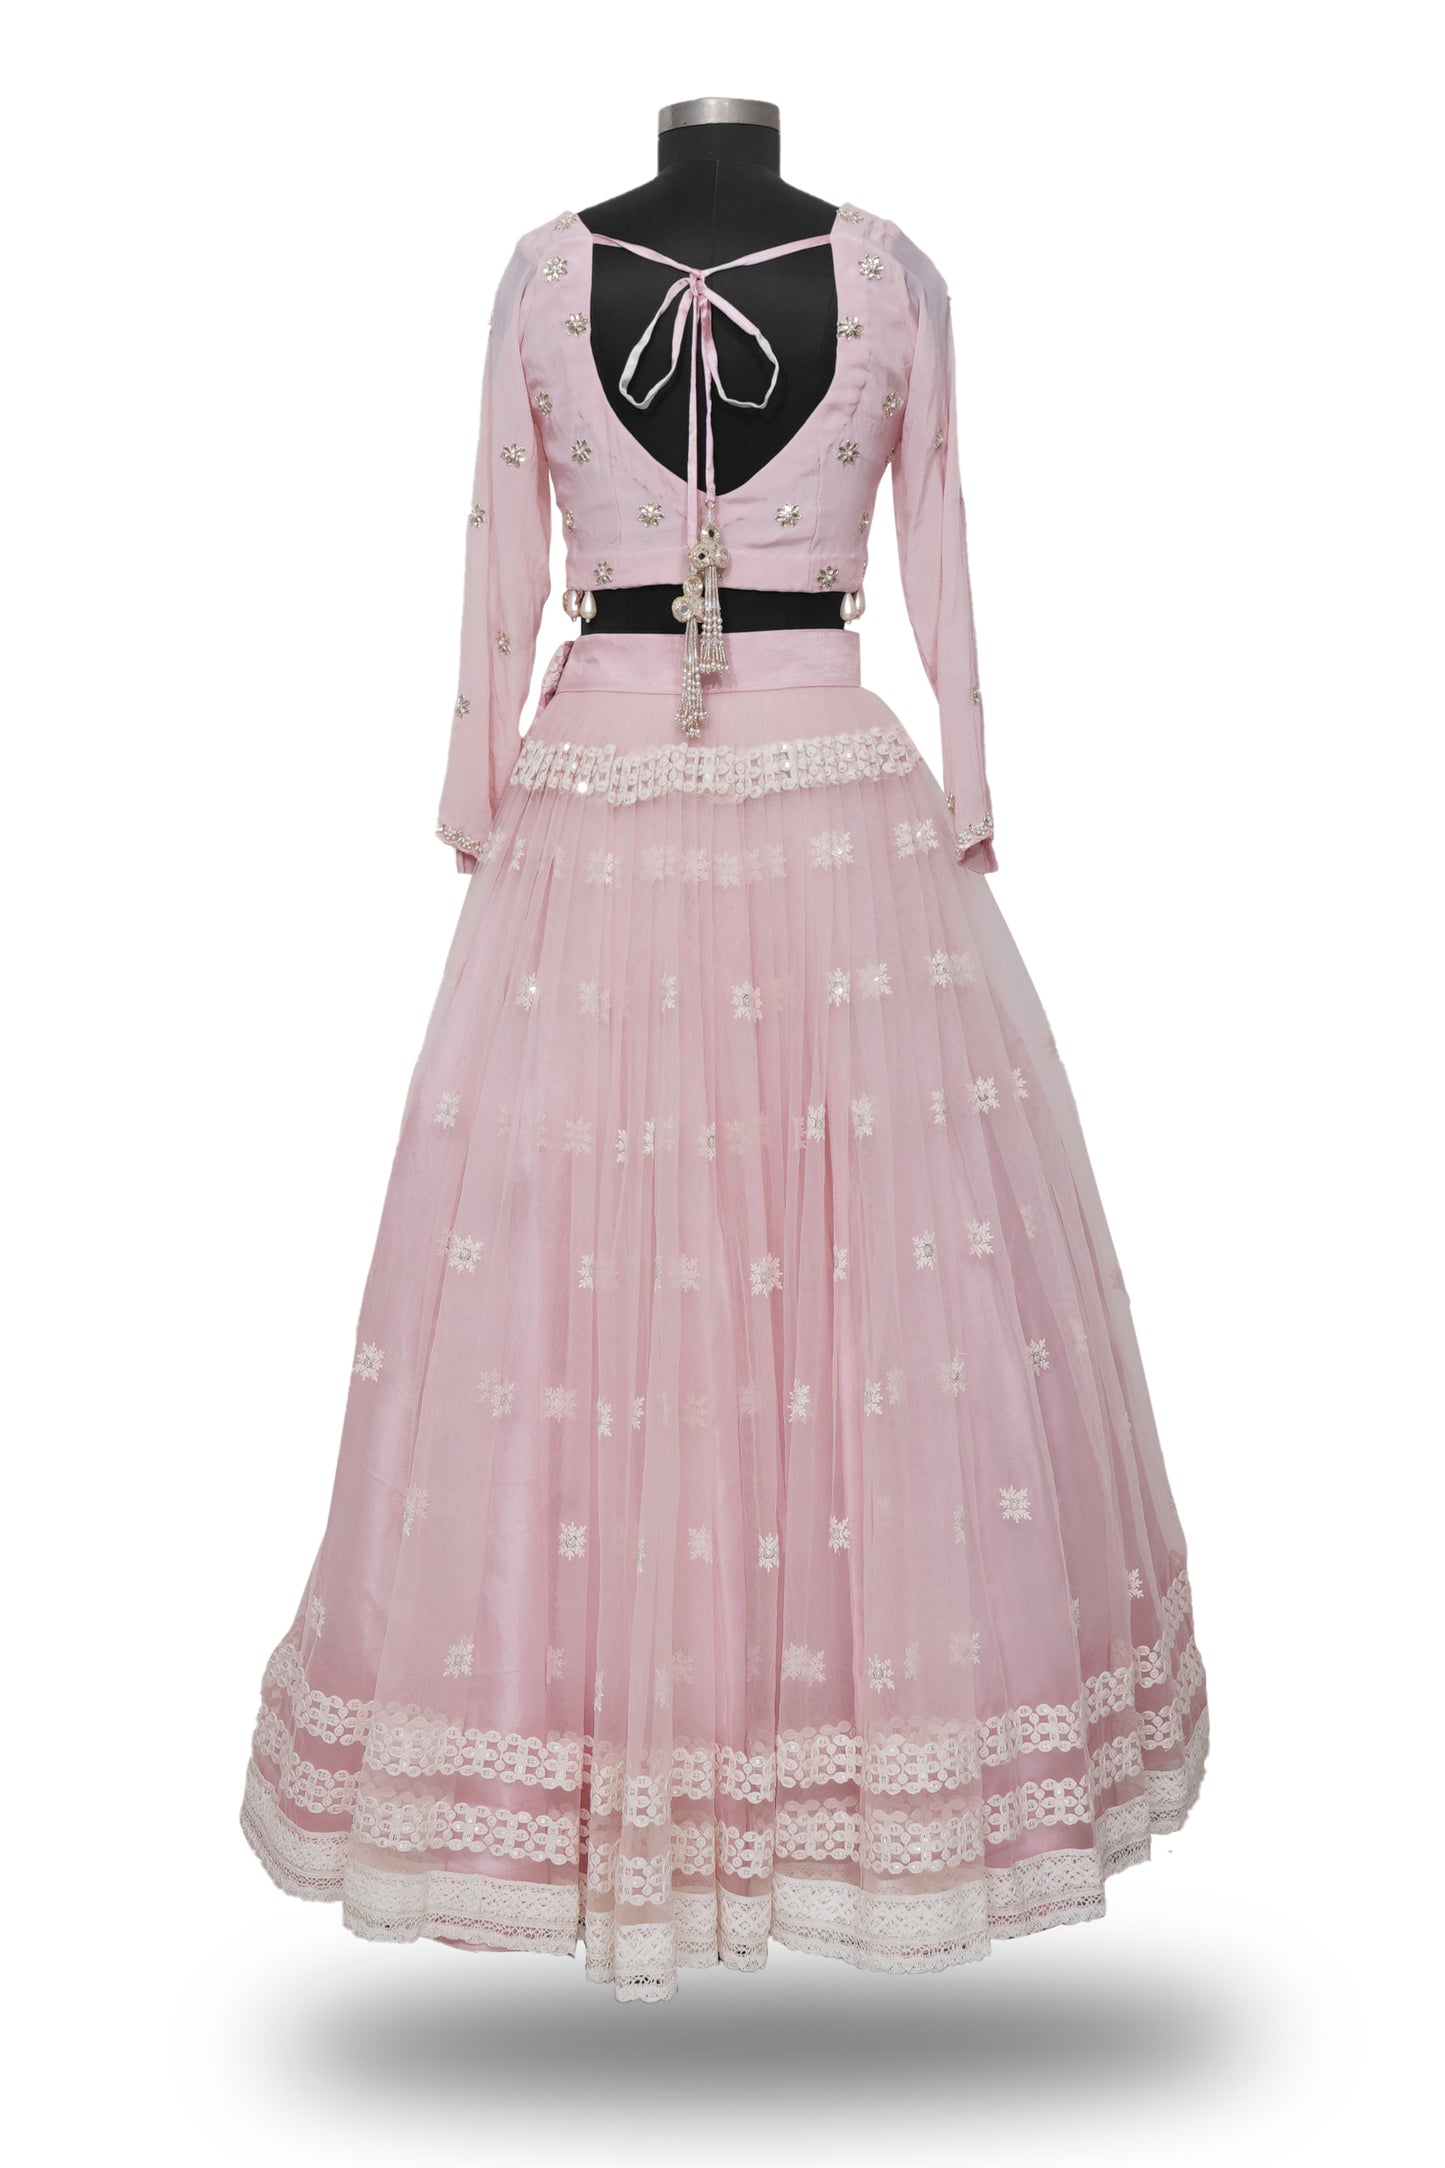 "Radiant in Pink: A Tulle Lehenga with Hand-Embroidered Blouse Adorned with Embellished Hangings"